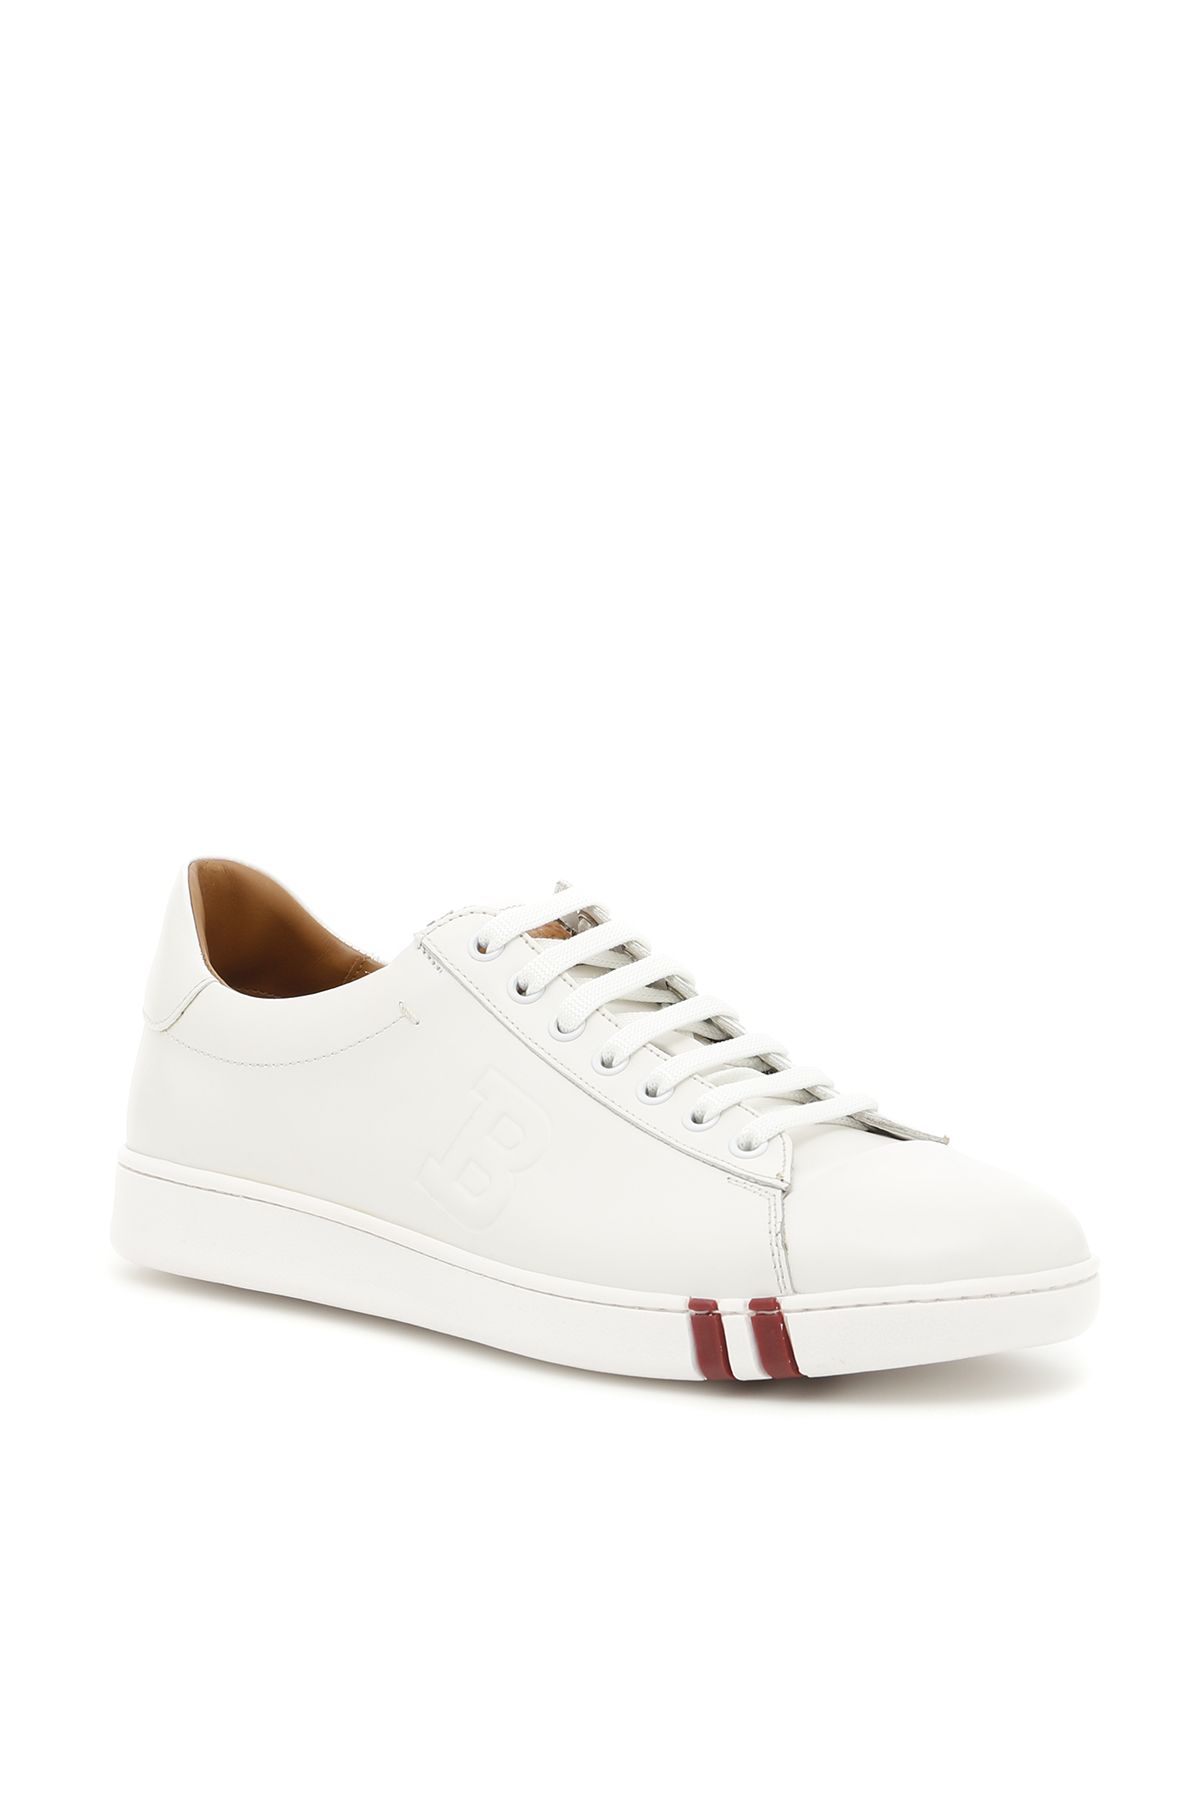 BALLY Asher Leather Tennis Trainers in 白色 | ModeSens